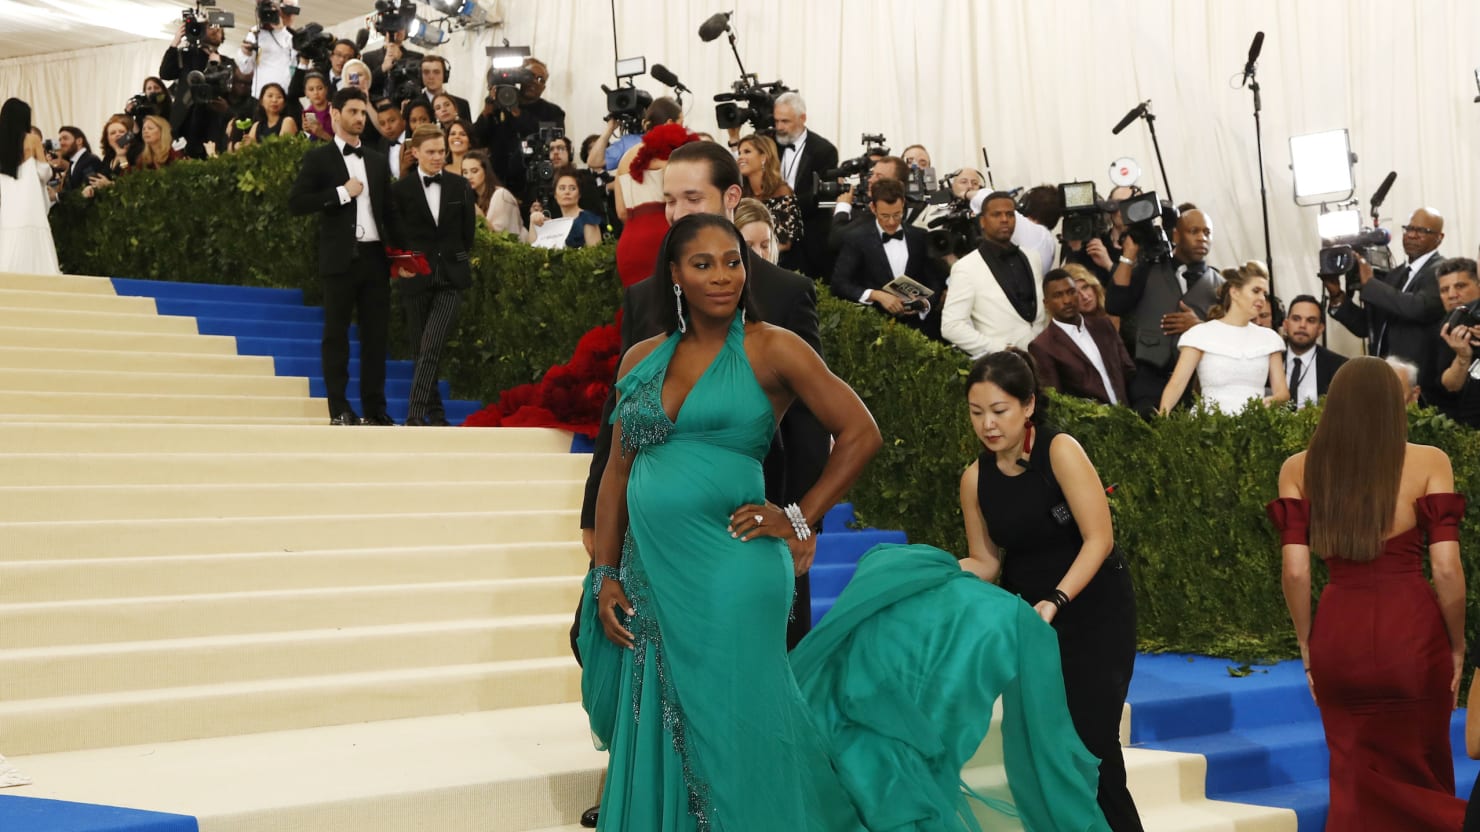 Report: Serena Williams Gives Birth To Baby Girl - The Daily Beast1480 x 832